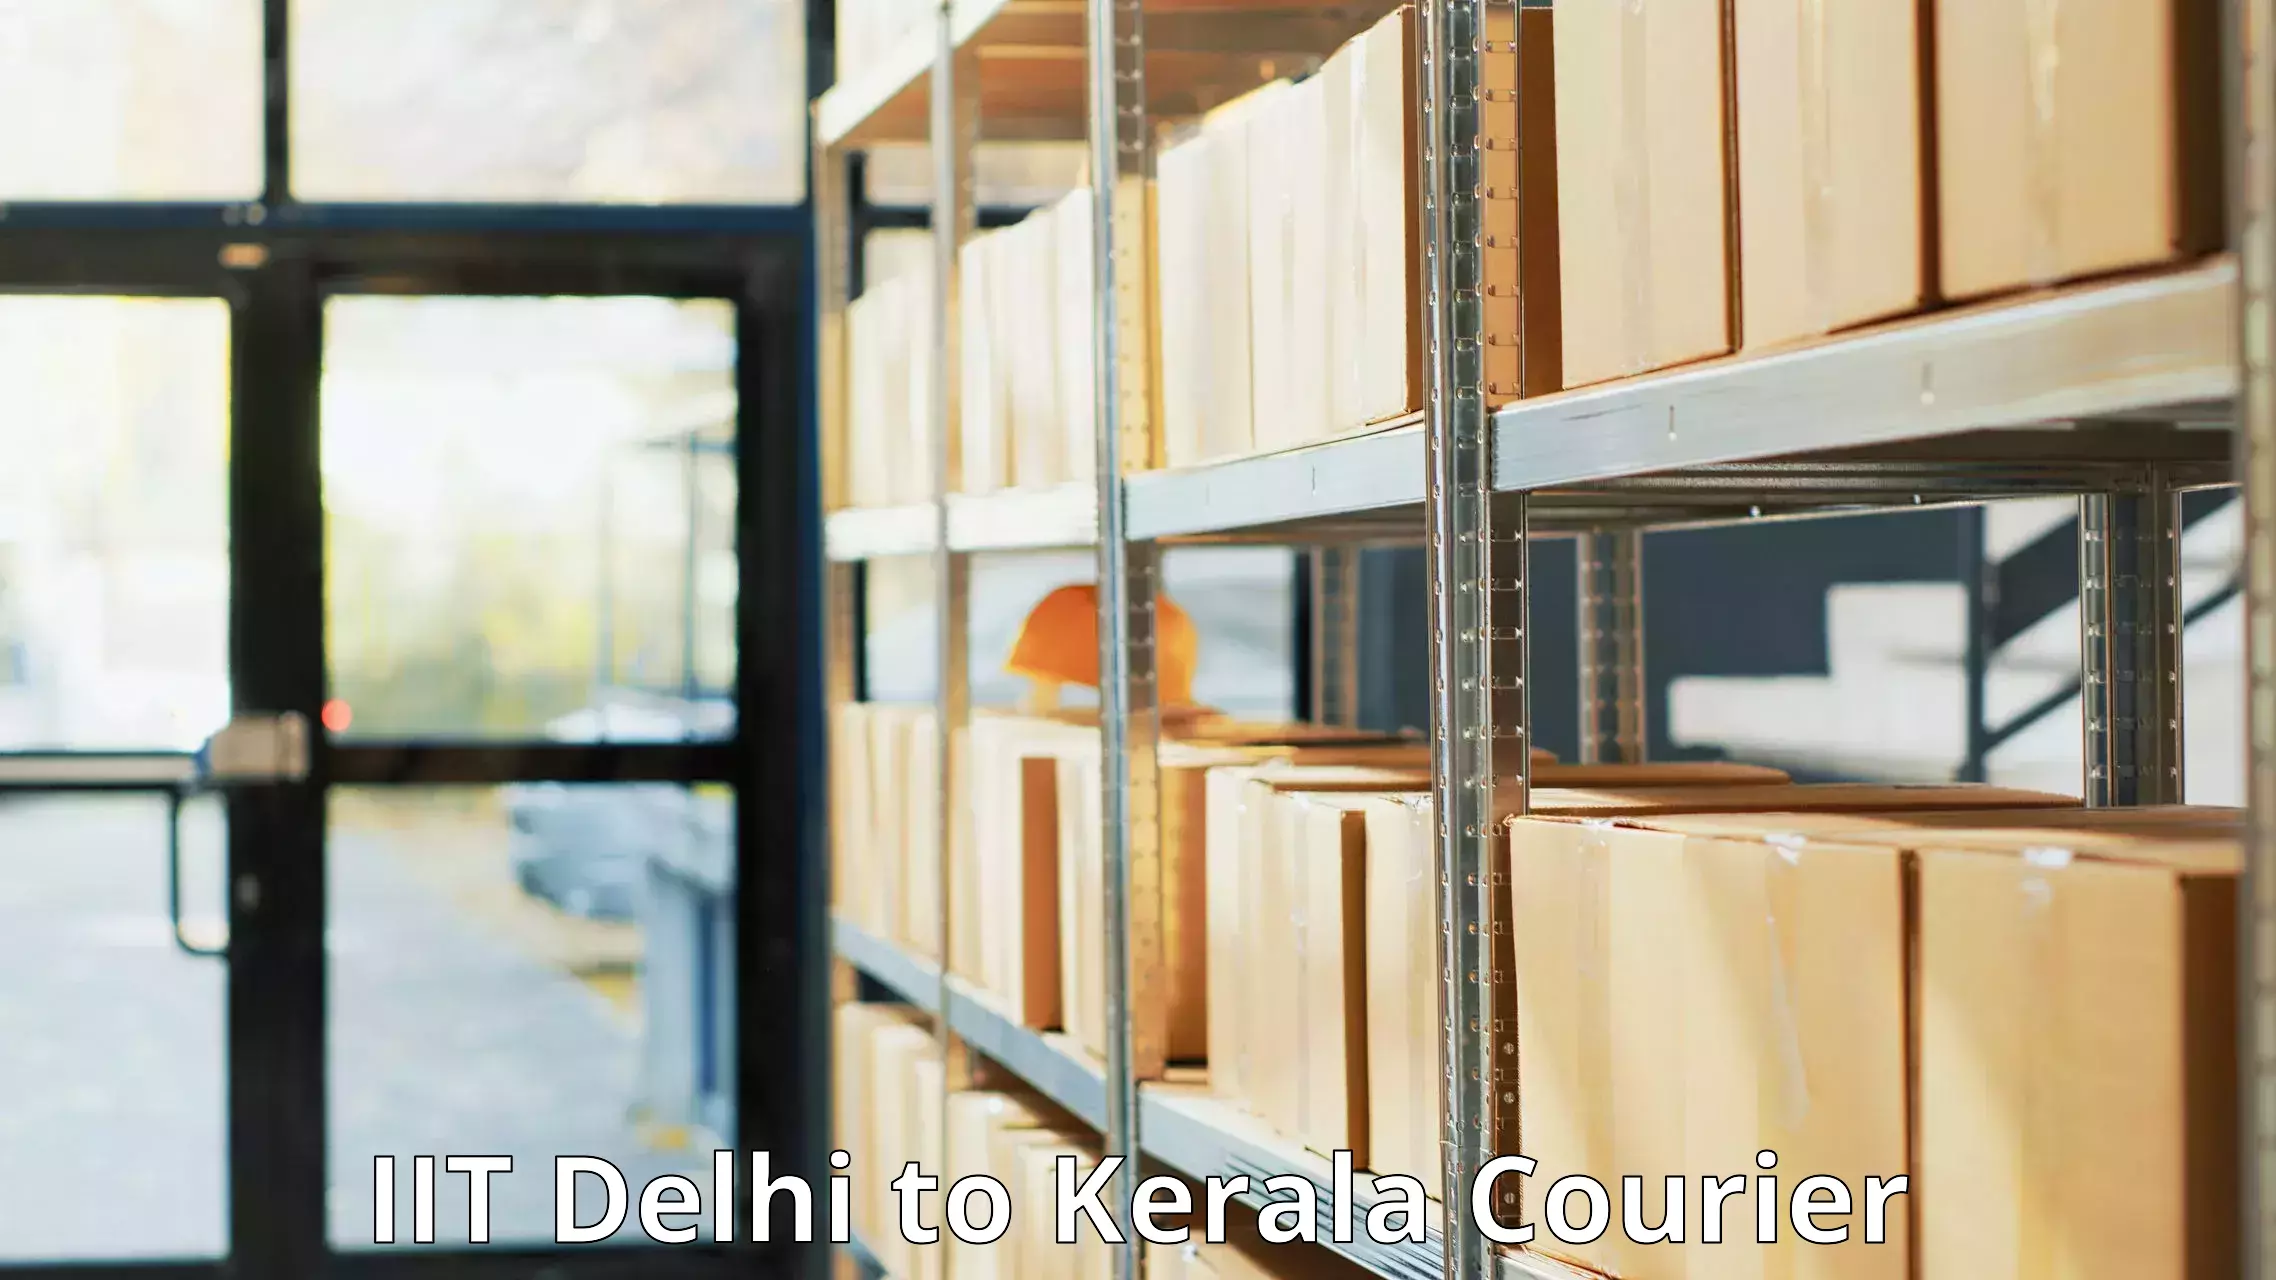 Next day courier IIT Delhi to Cochin University of Science and Technology